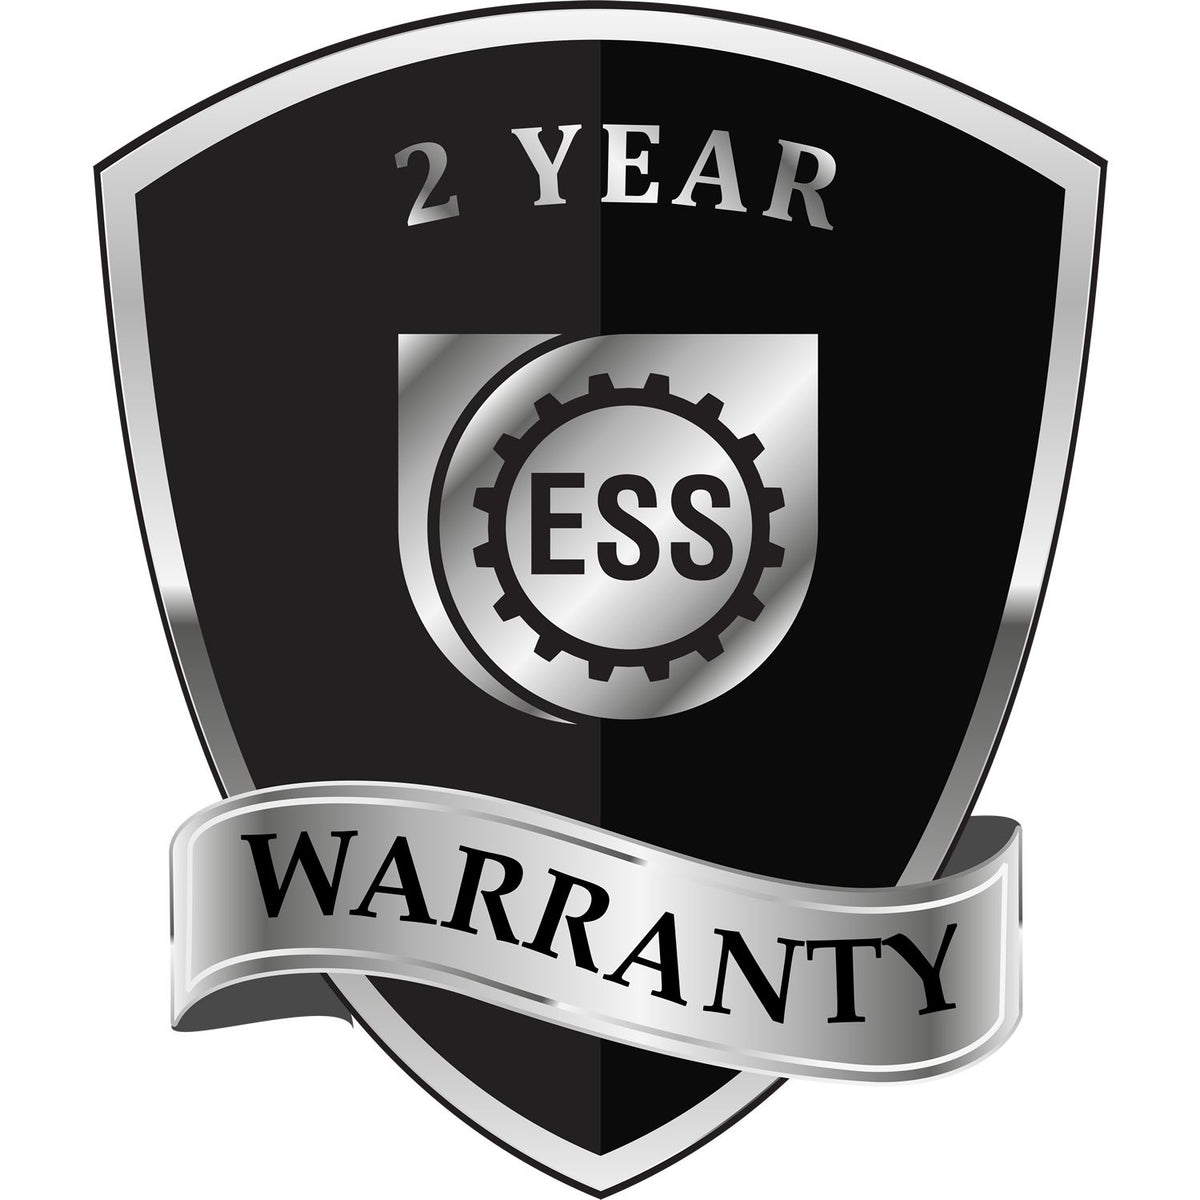 A badge or emblem showing a warranty icon for the State of Georgia Architectural Seal Embosser